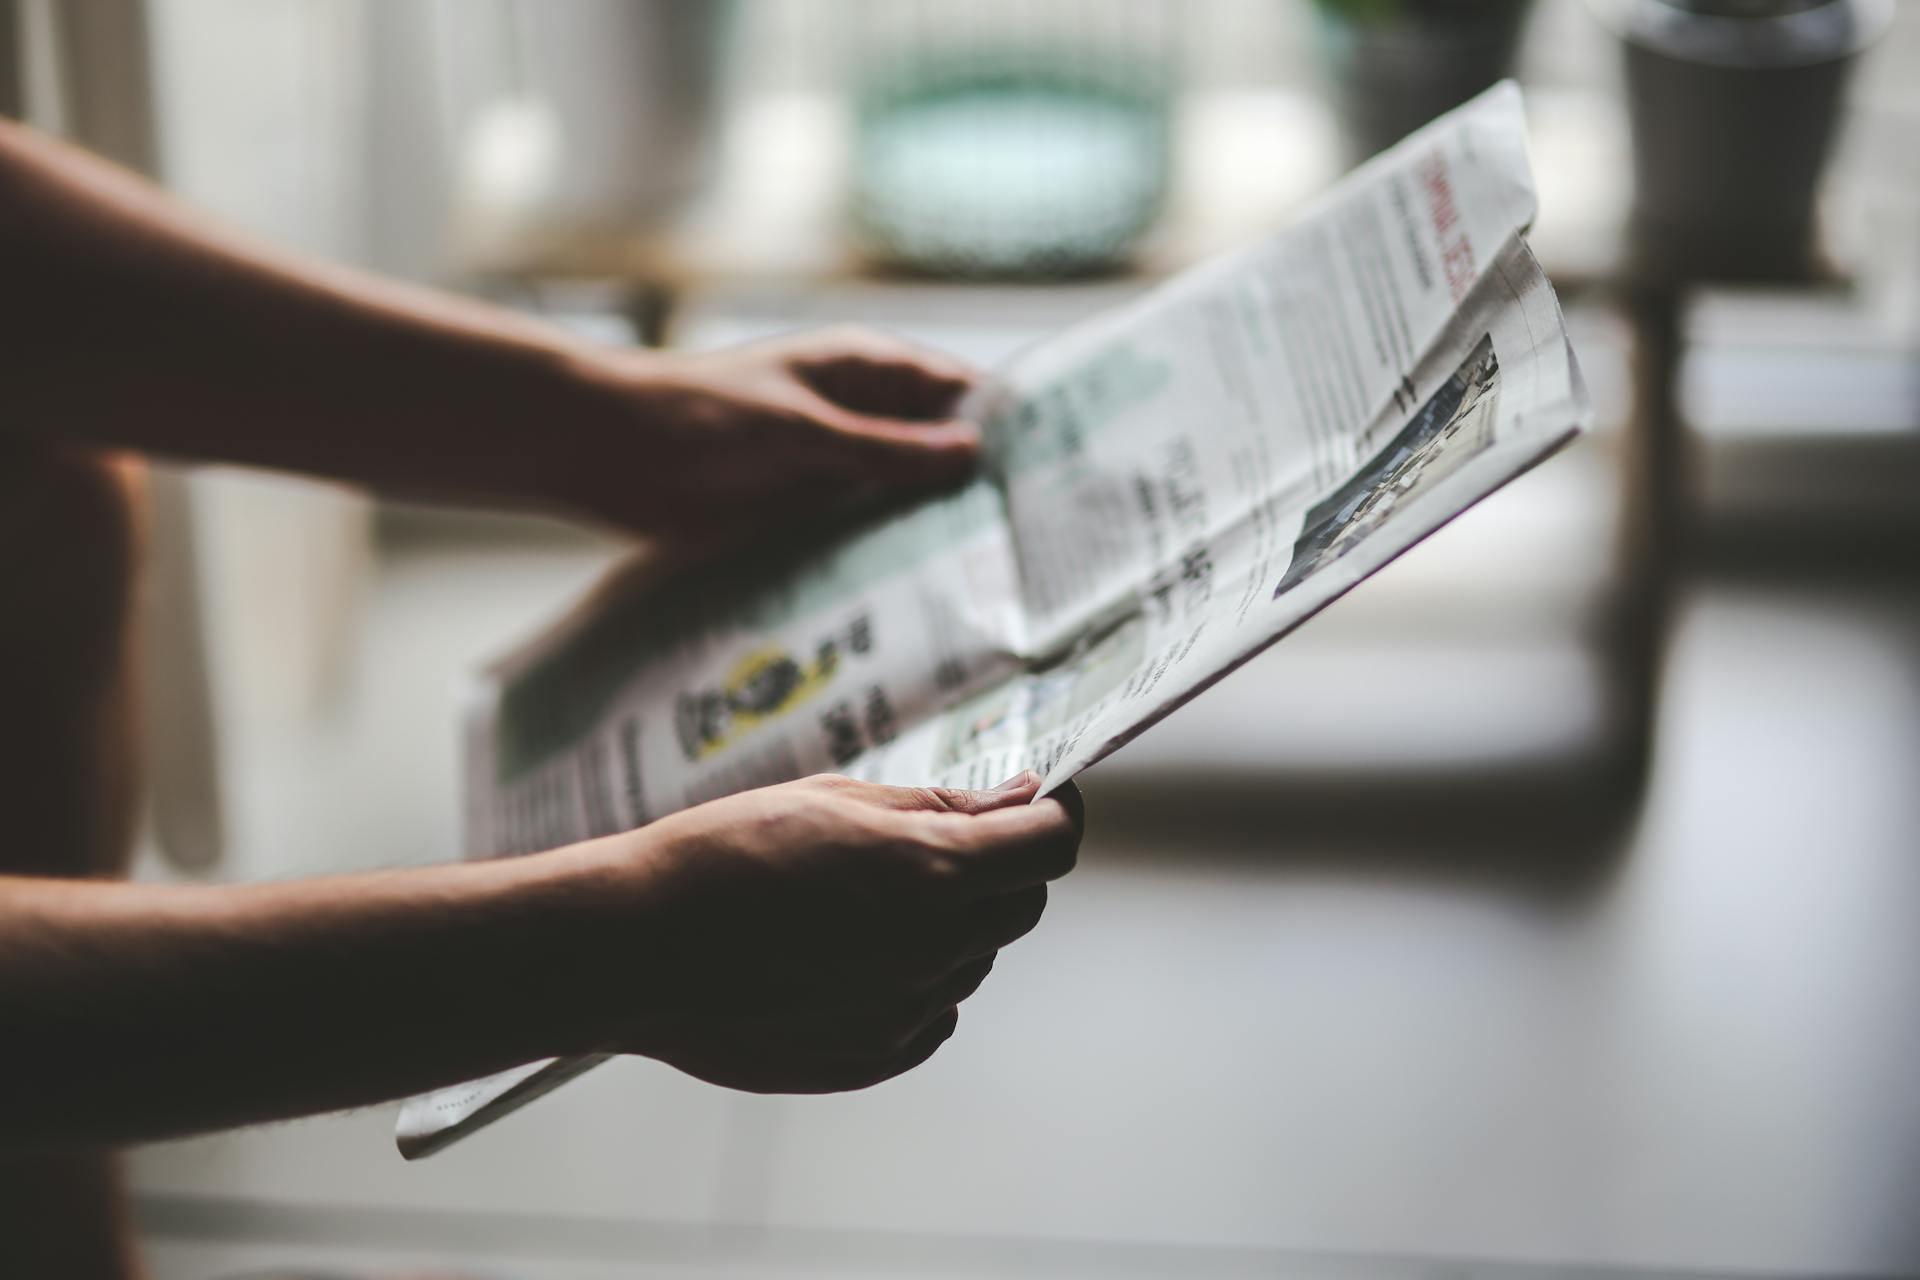 A person holding a newspaper | Source: Pexels